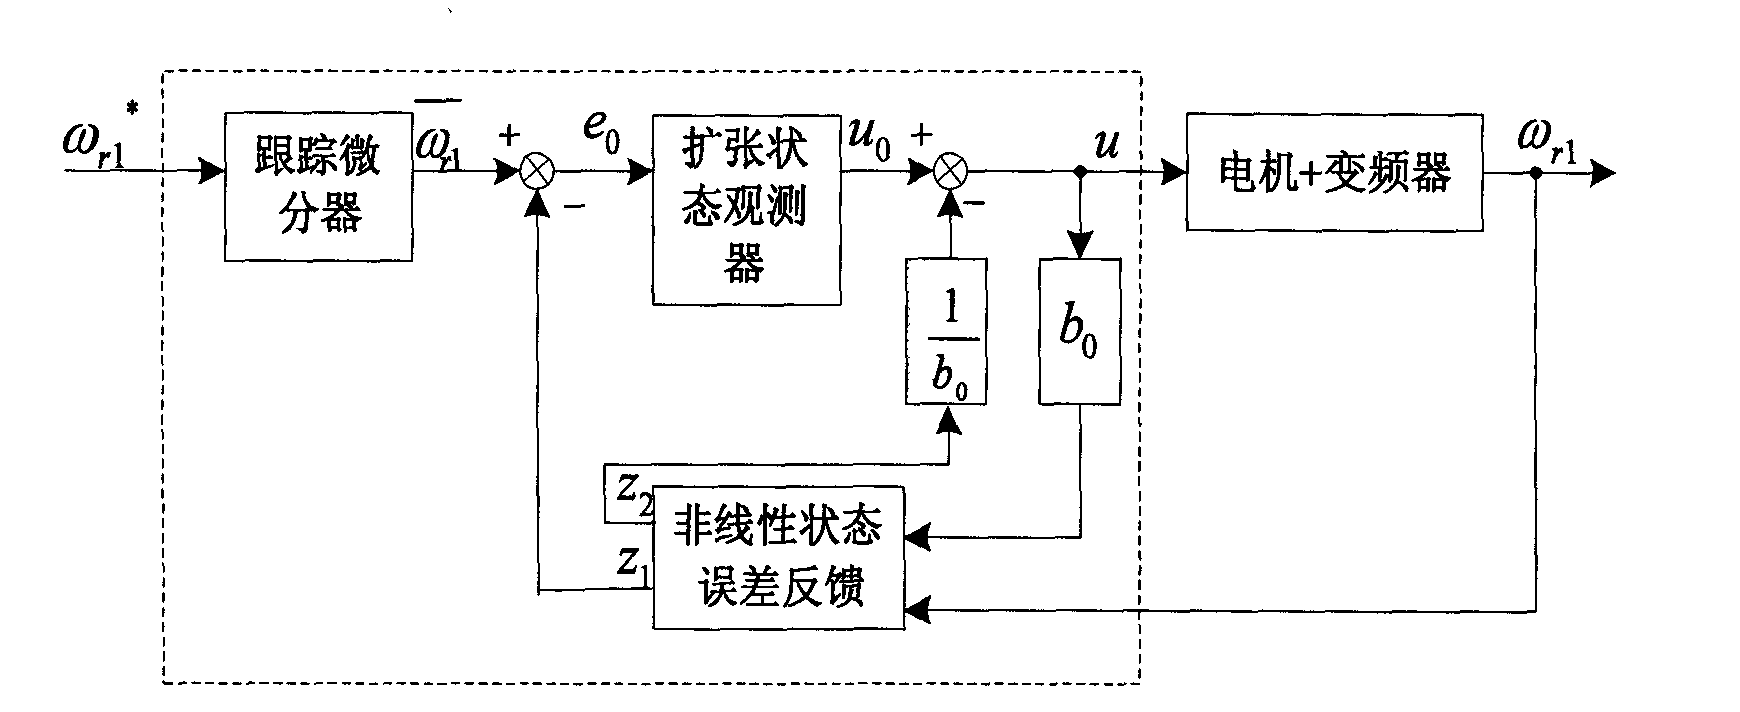 Construction method for automatic disturbance rejection controller of three-motor synchronous control system